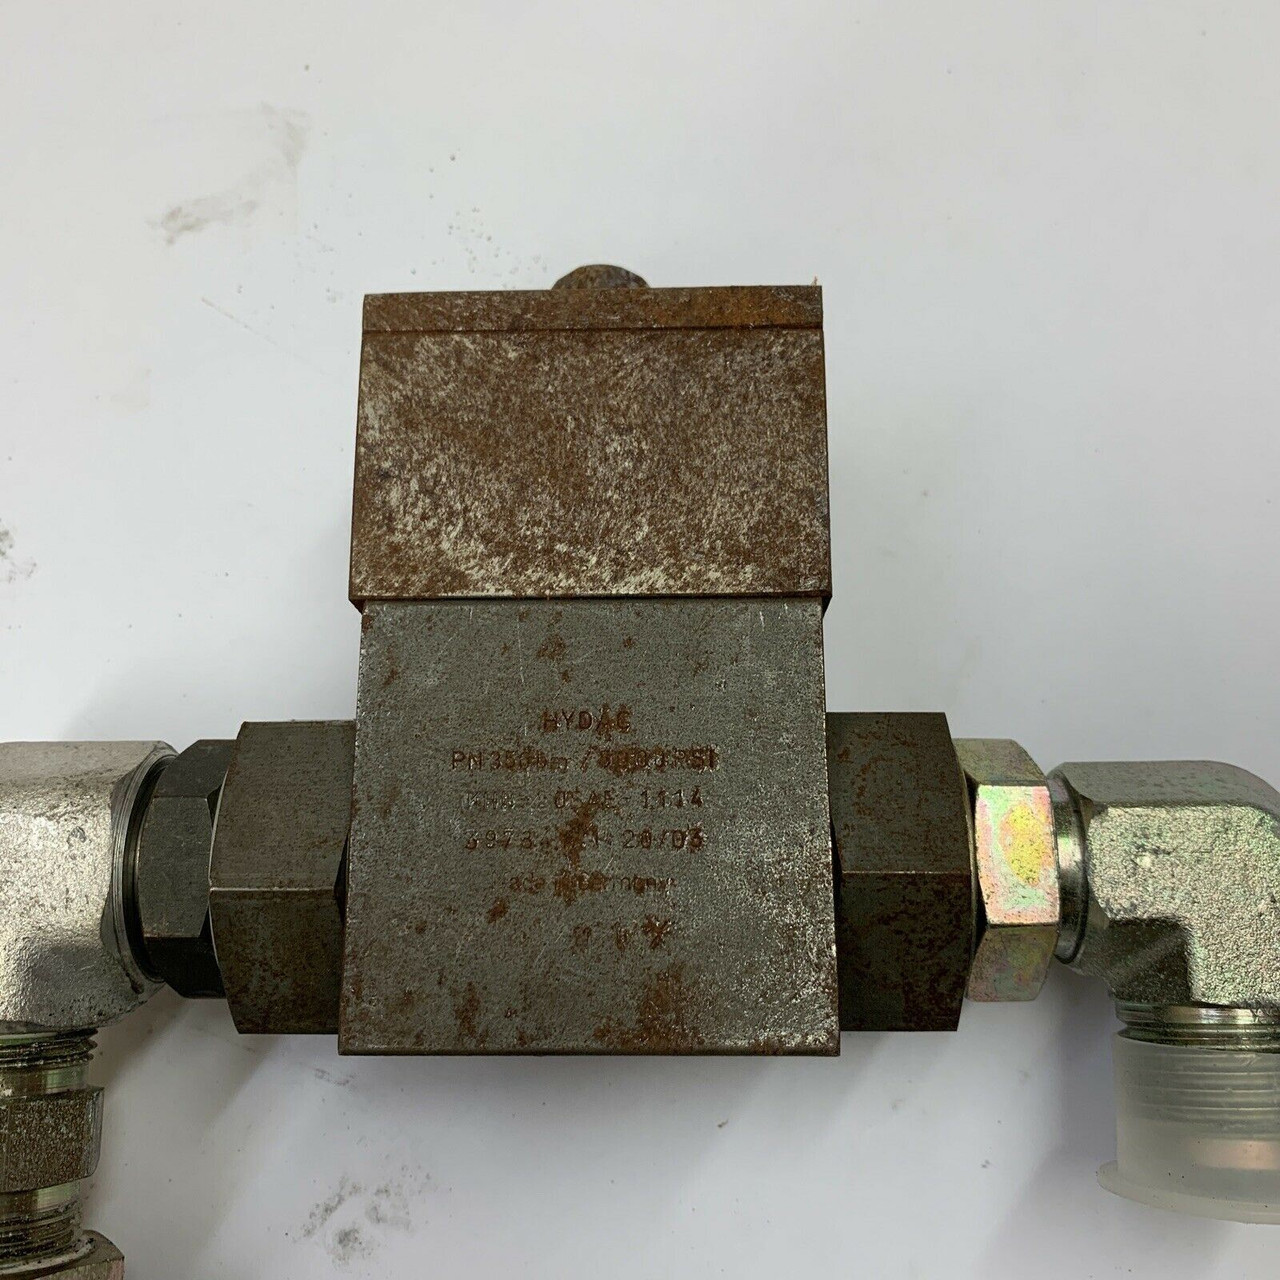 IDS Solenoid Dump Valve S097-25-2878 Integrated Distribution Systems